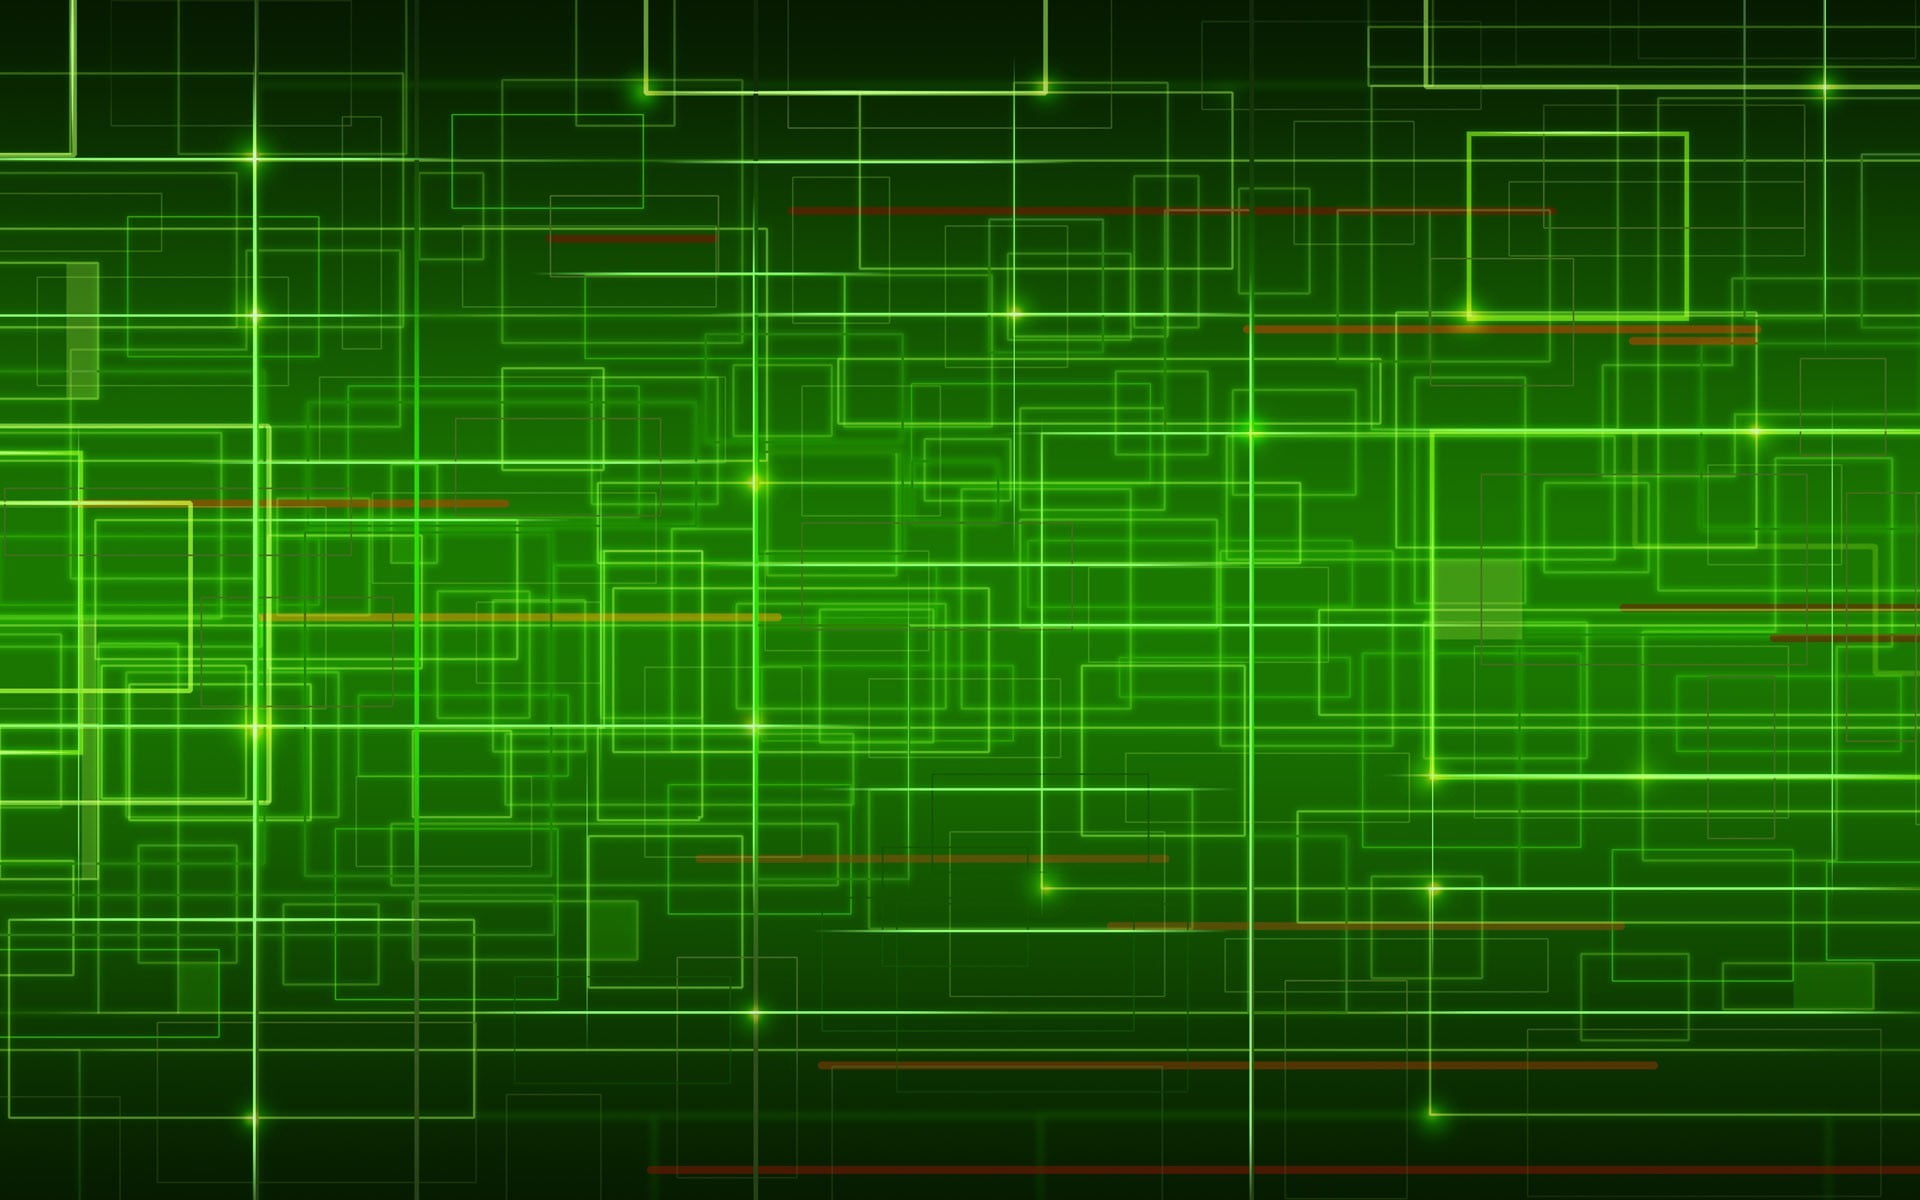 green, green color, pattern, backgrounds, full frame, no people